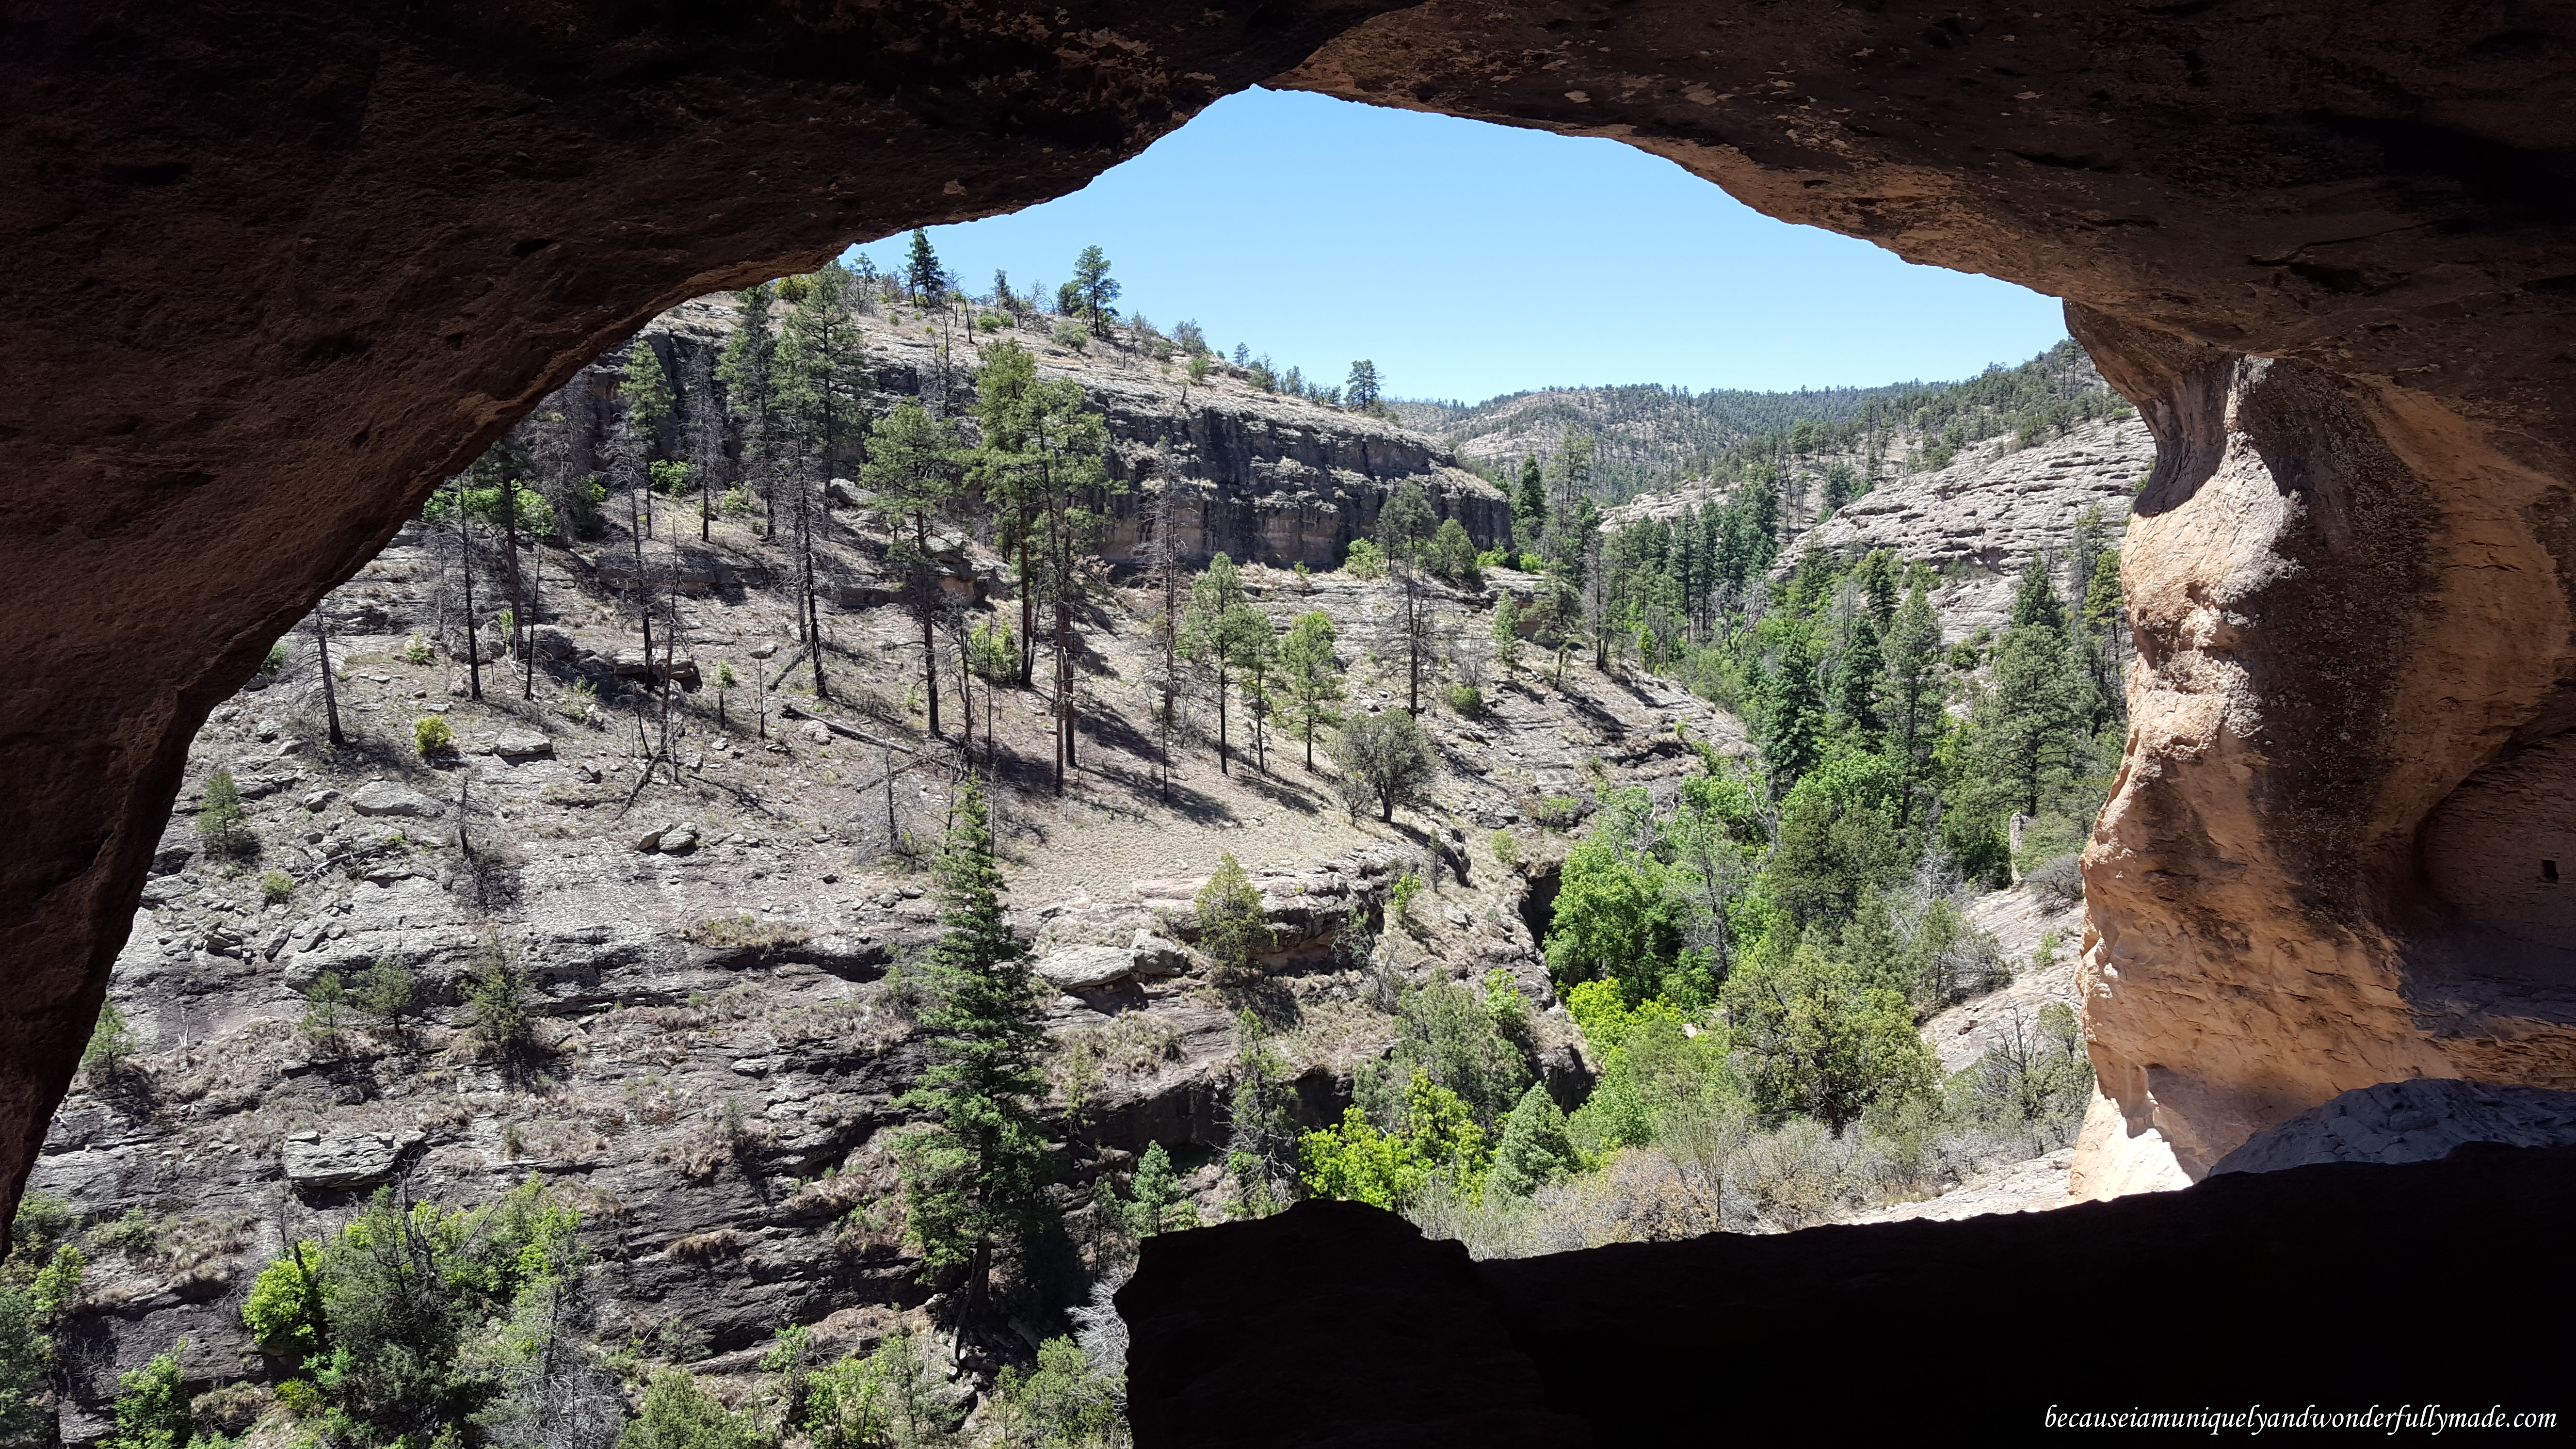 The view from inside the Gila cliff dwellings.